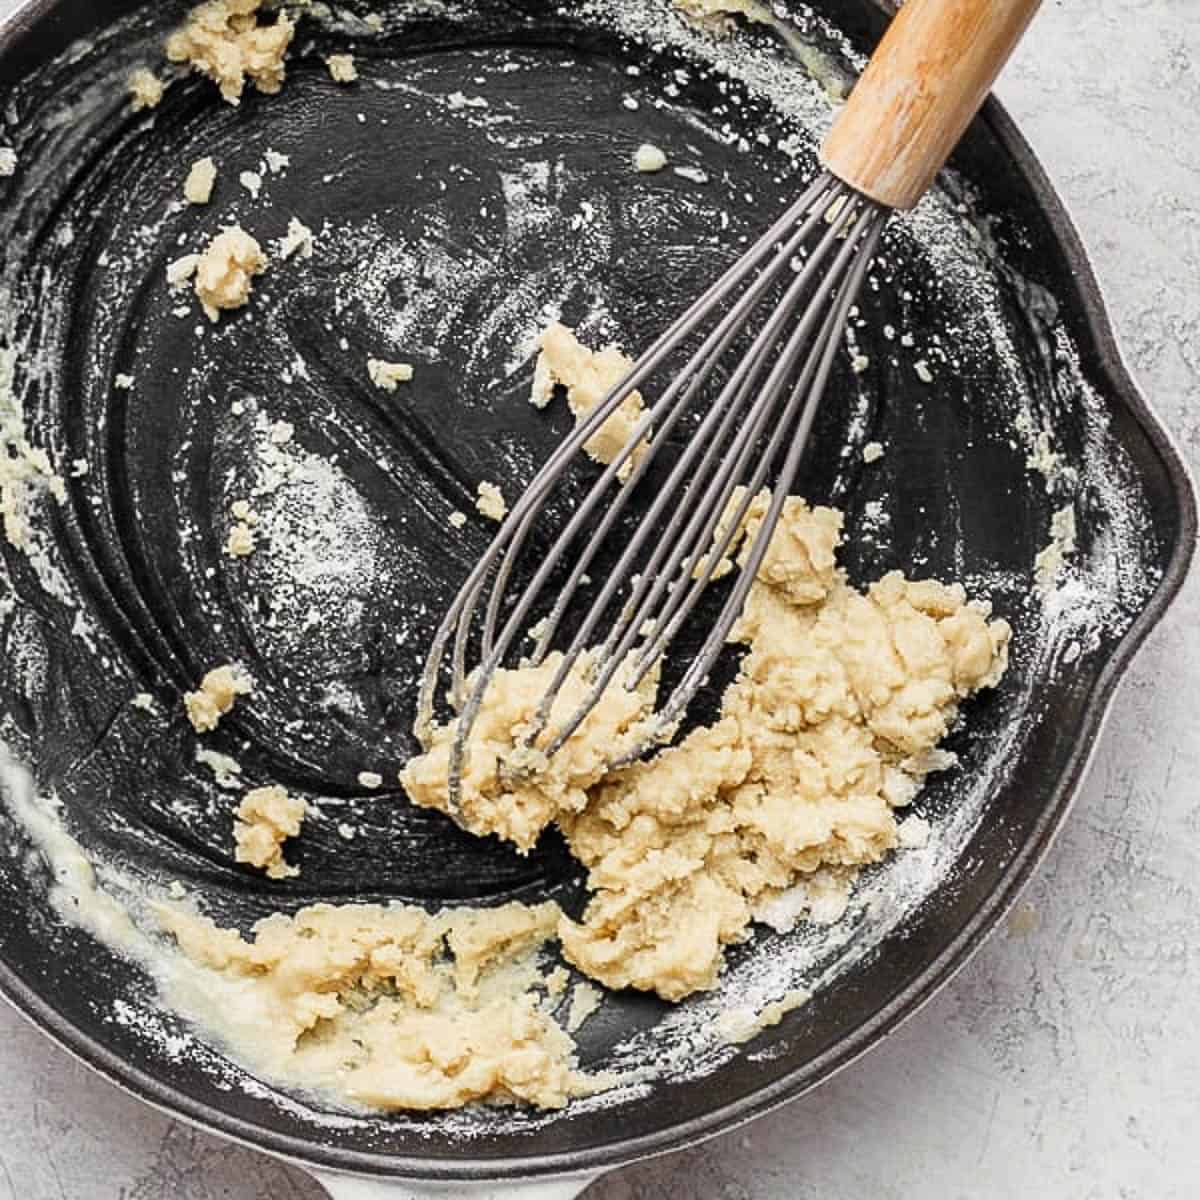 https://thewoodenskillet.com/wp-content/uploads/2015/12/how-to-make-a-roux-recipe-1.jpg